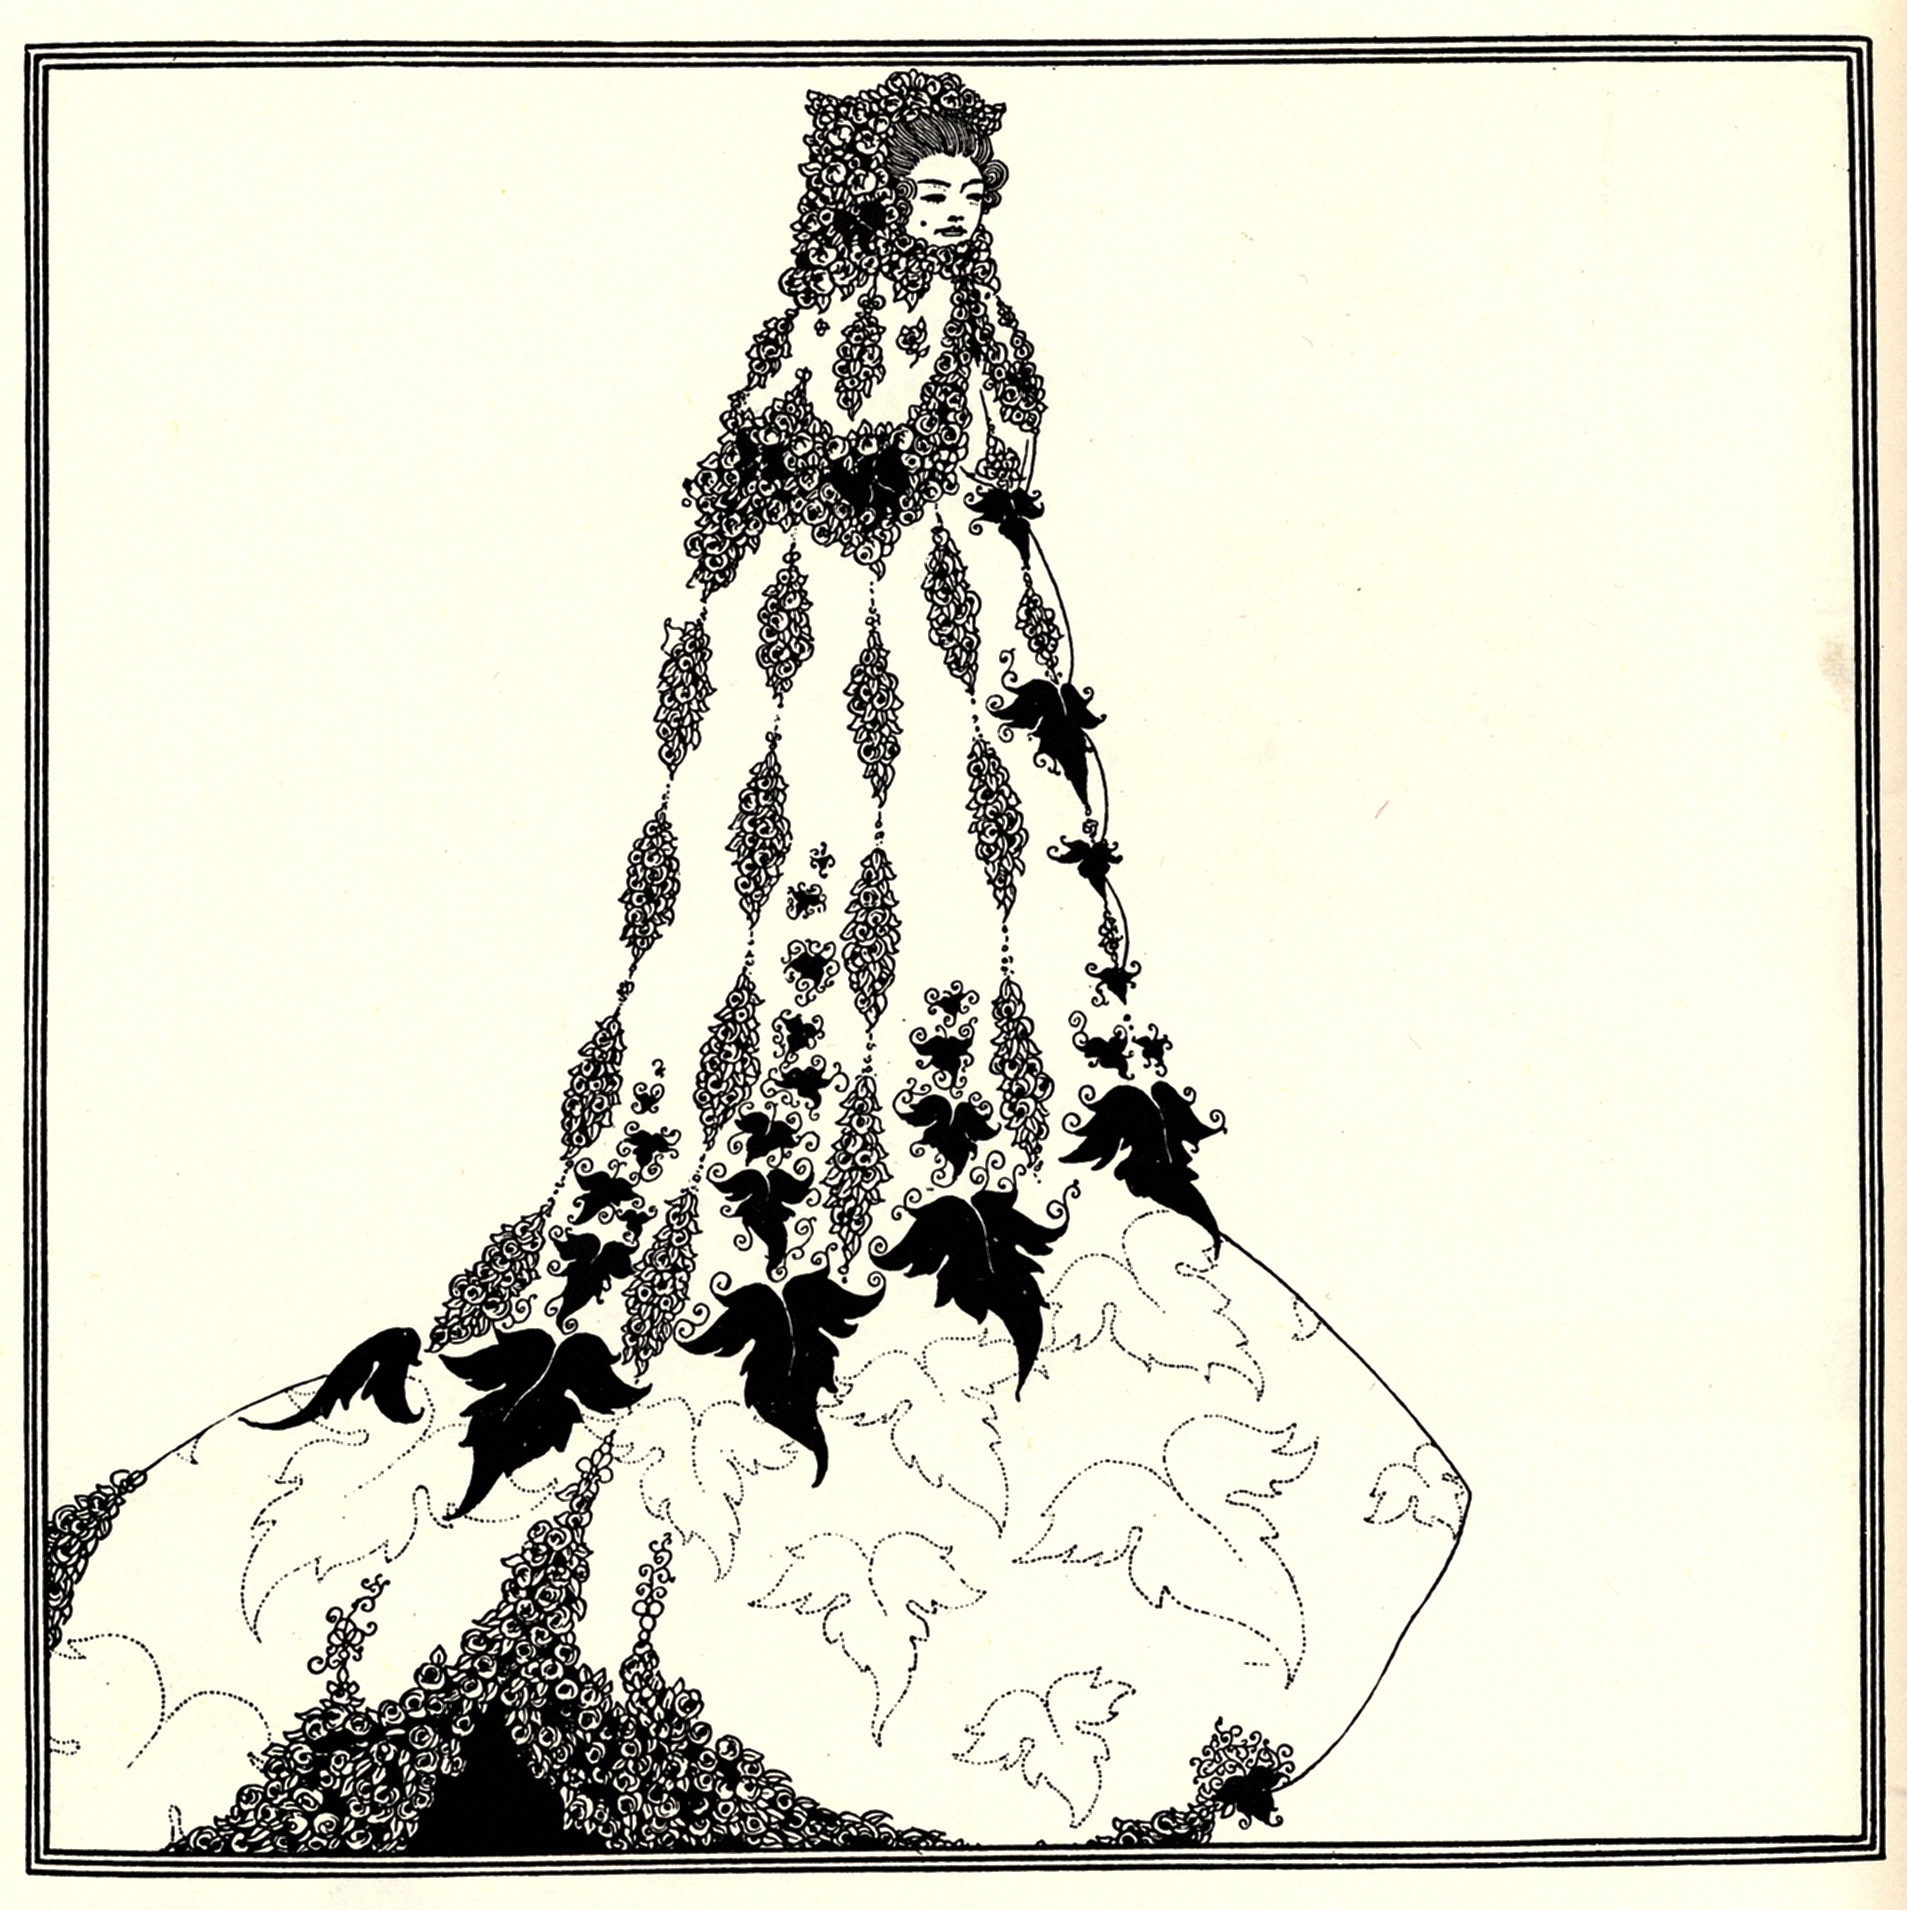 Aubrey Beardsley - A Suggested Reform in Ballet Costume